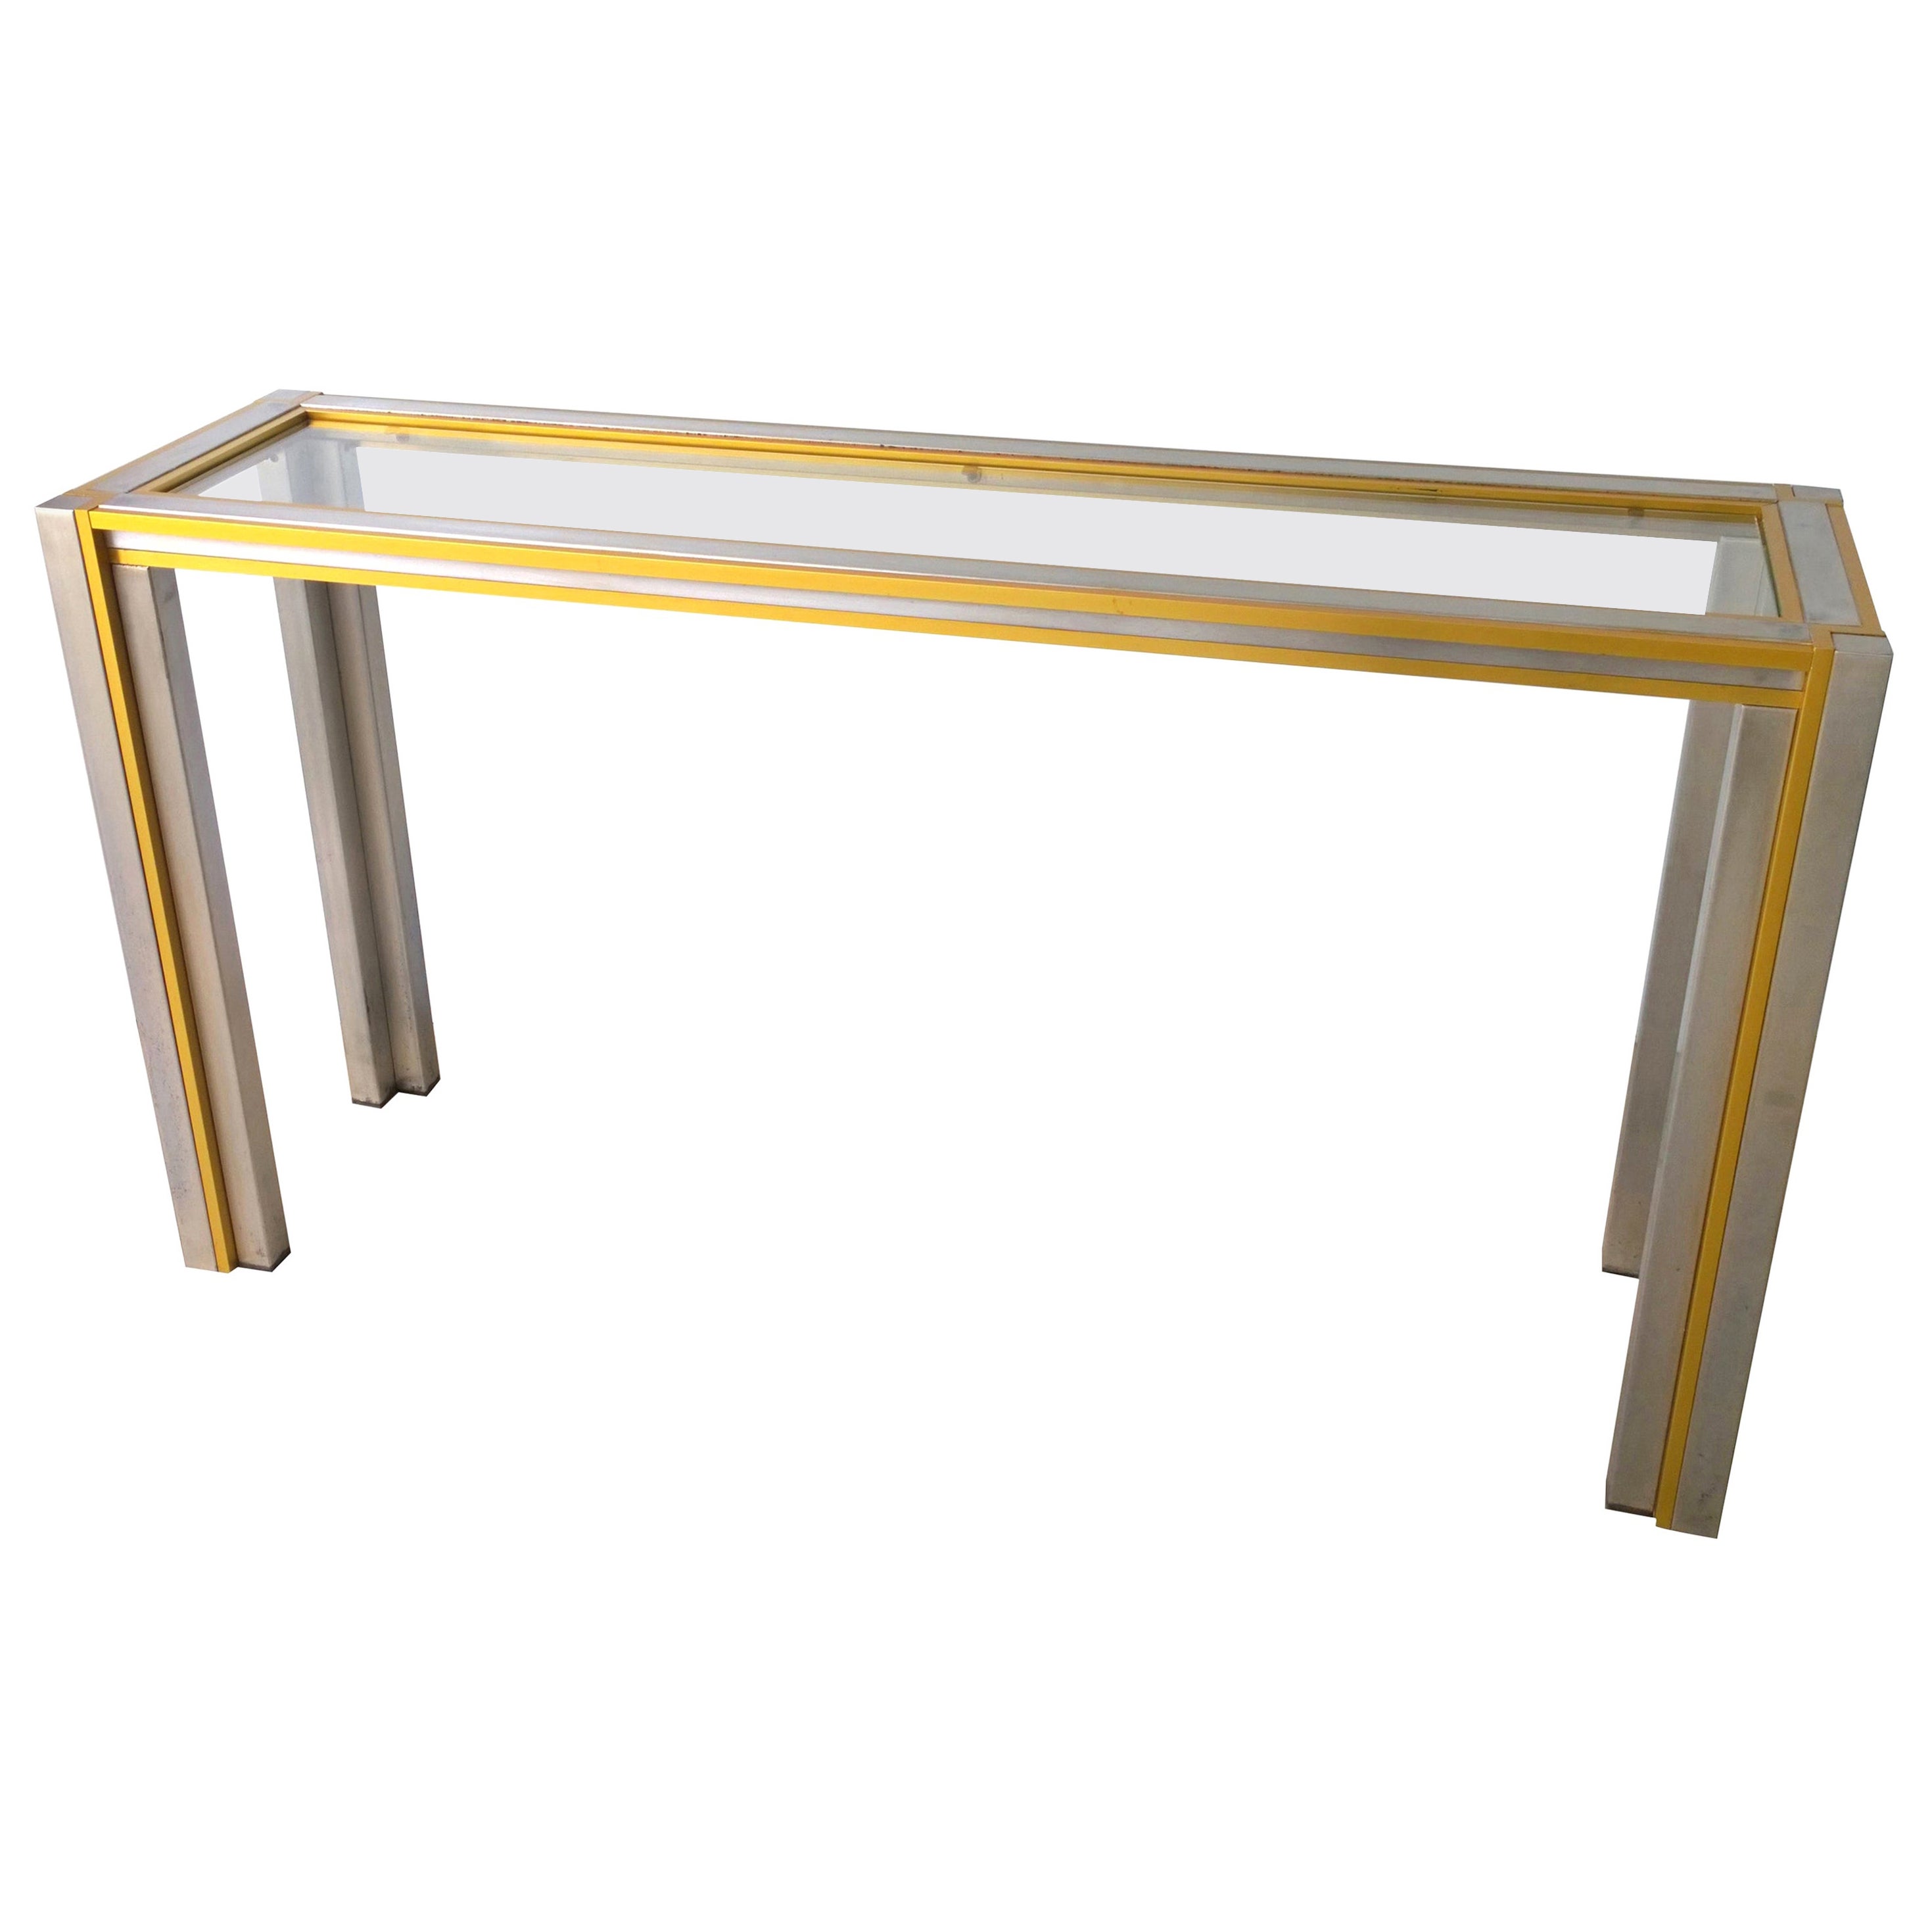 Willy Rizzo Attrib, Inlaid Glass, Gold Tone Aluminum & Steel Frame Console Table